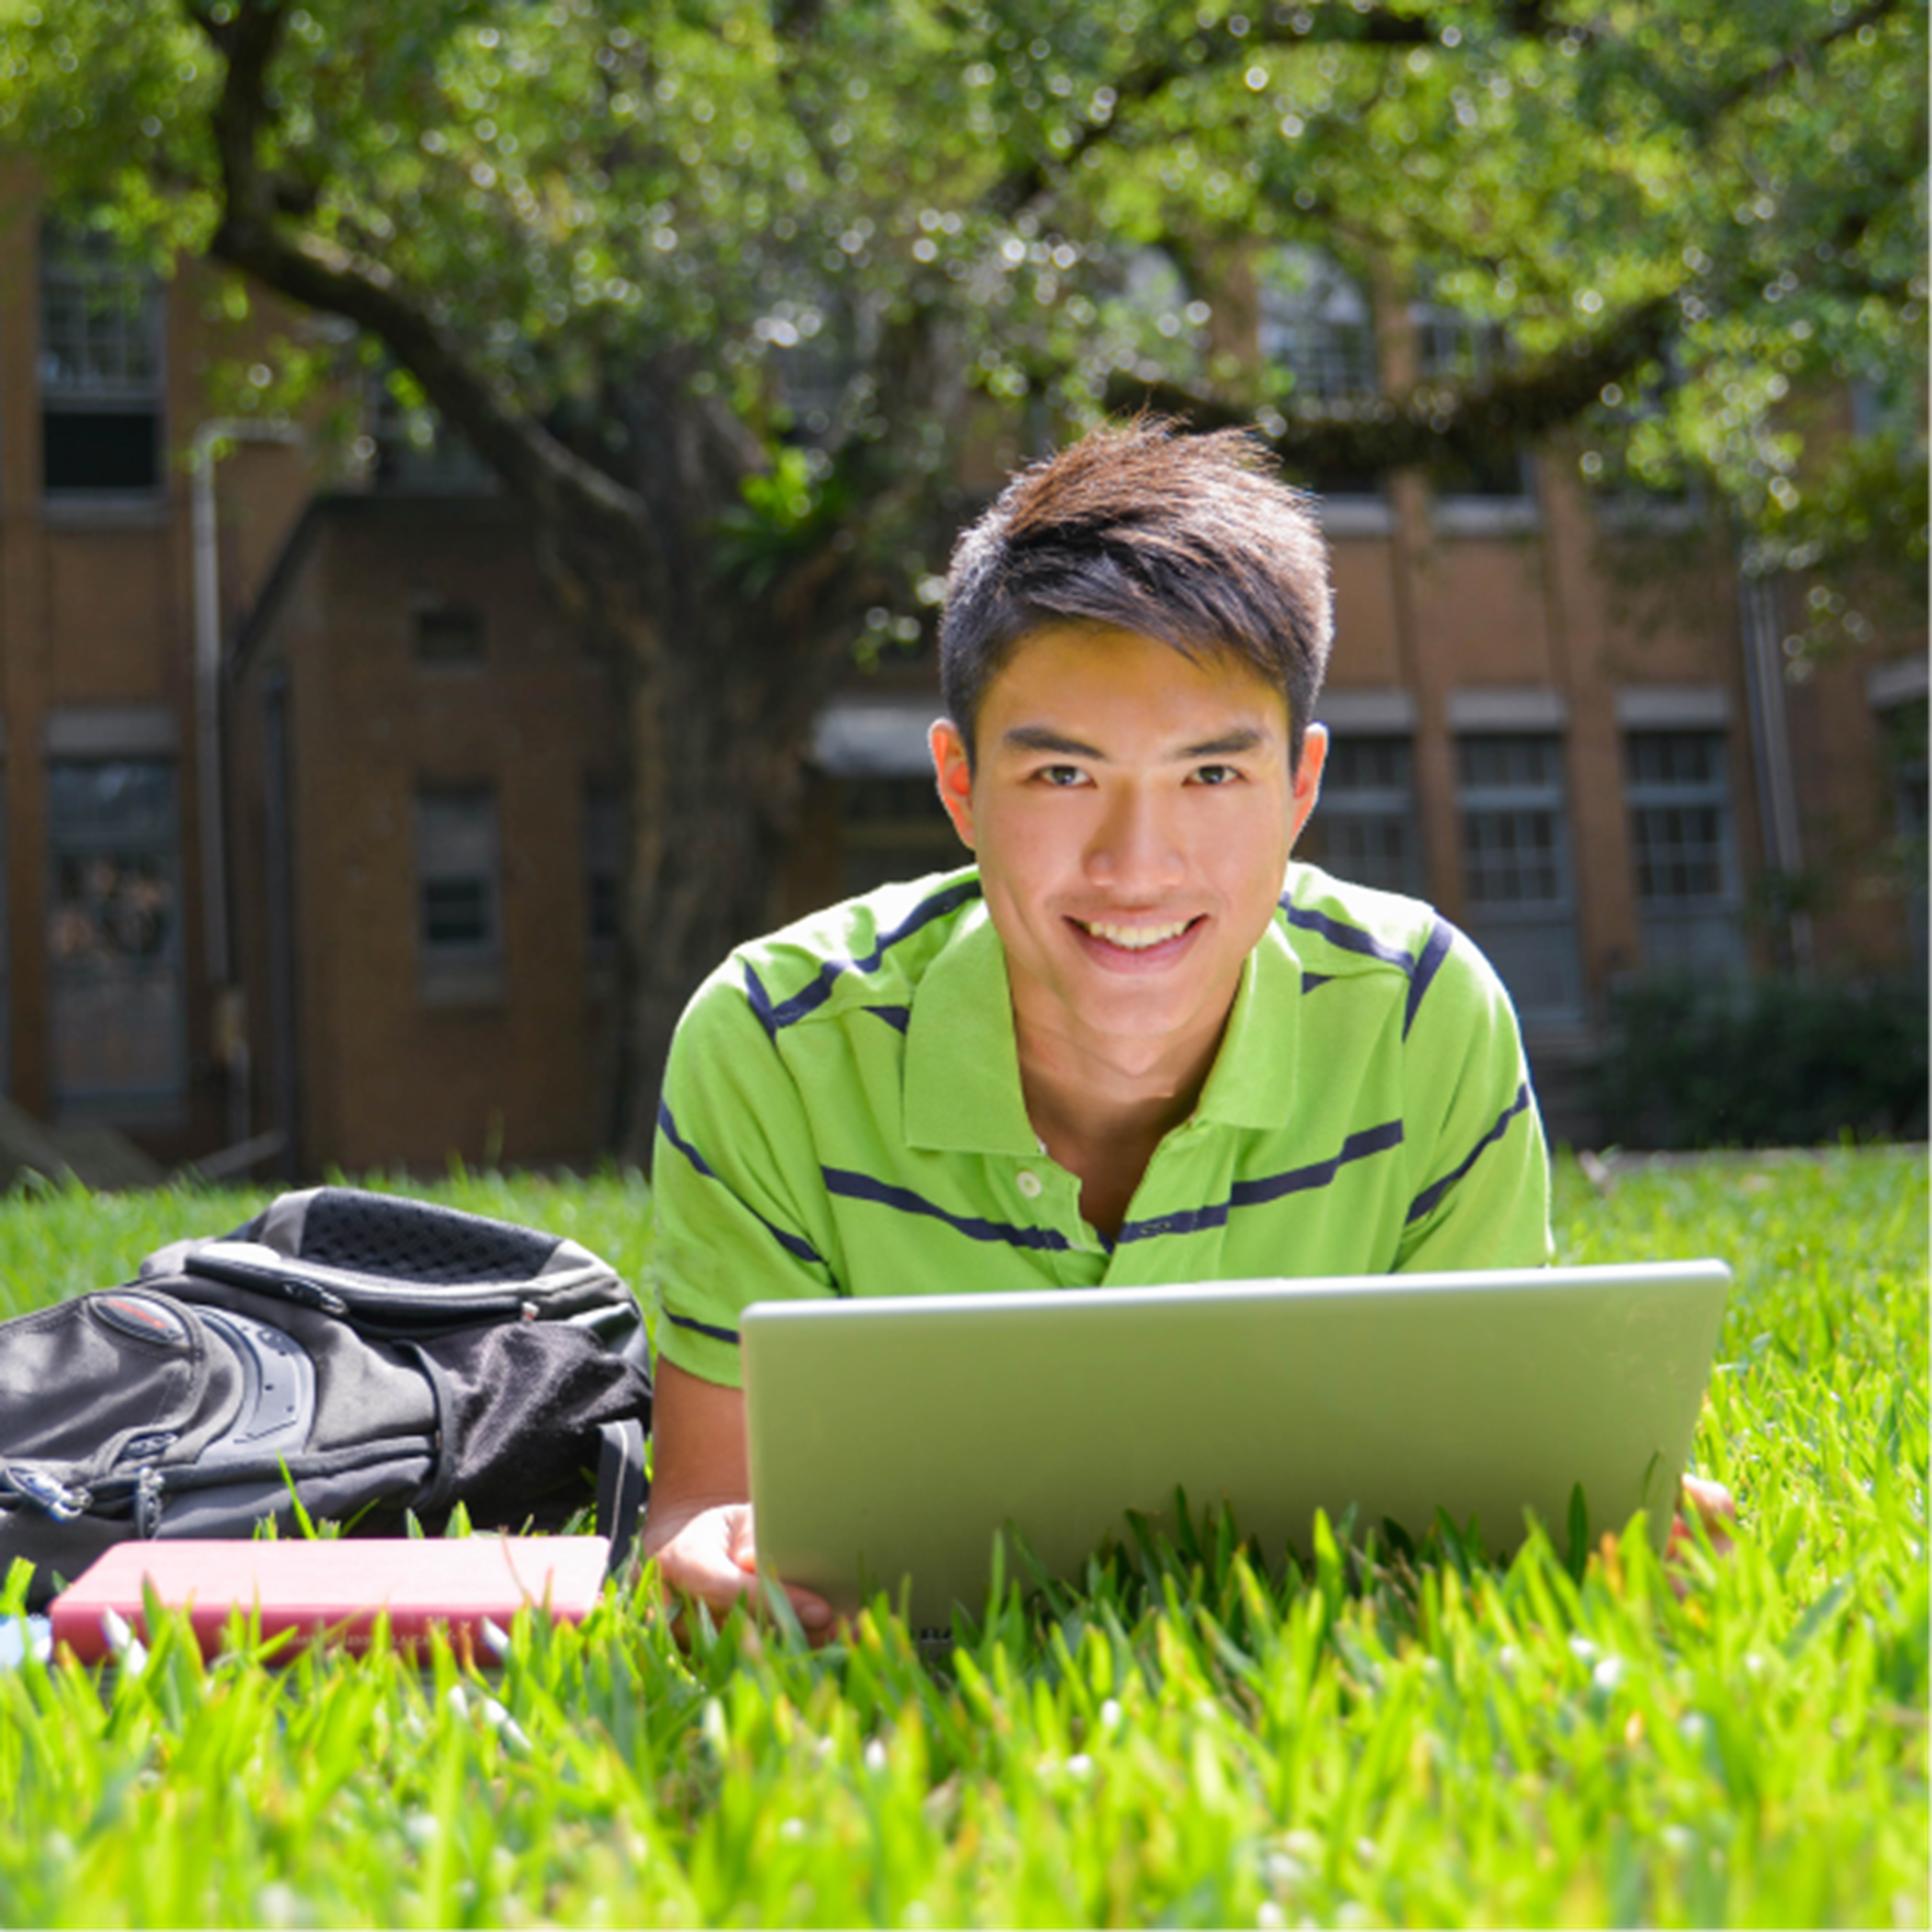 Student with laptop on grass